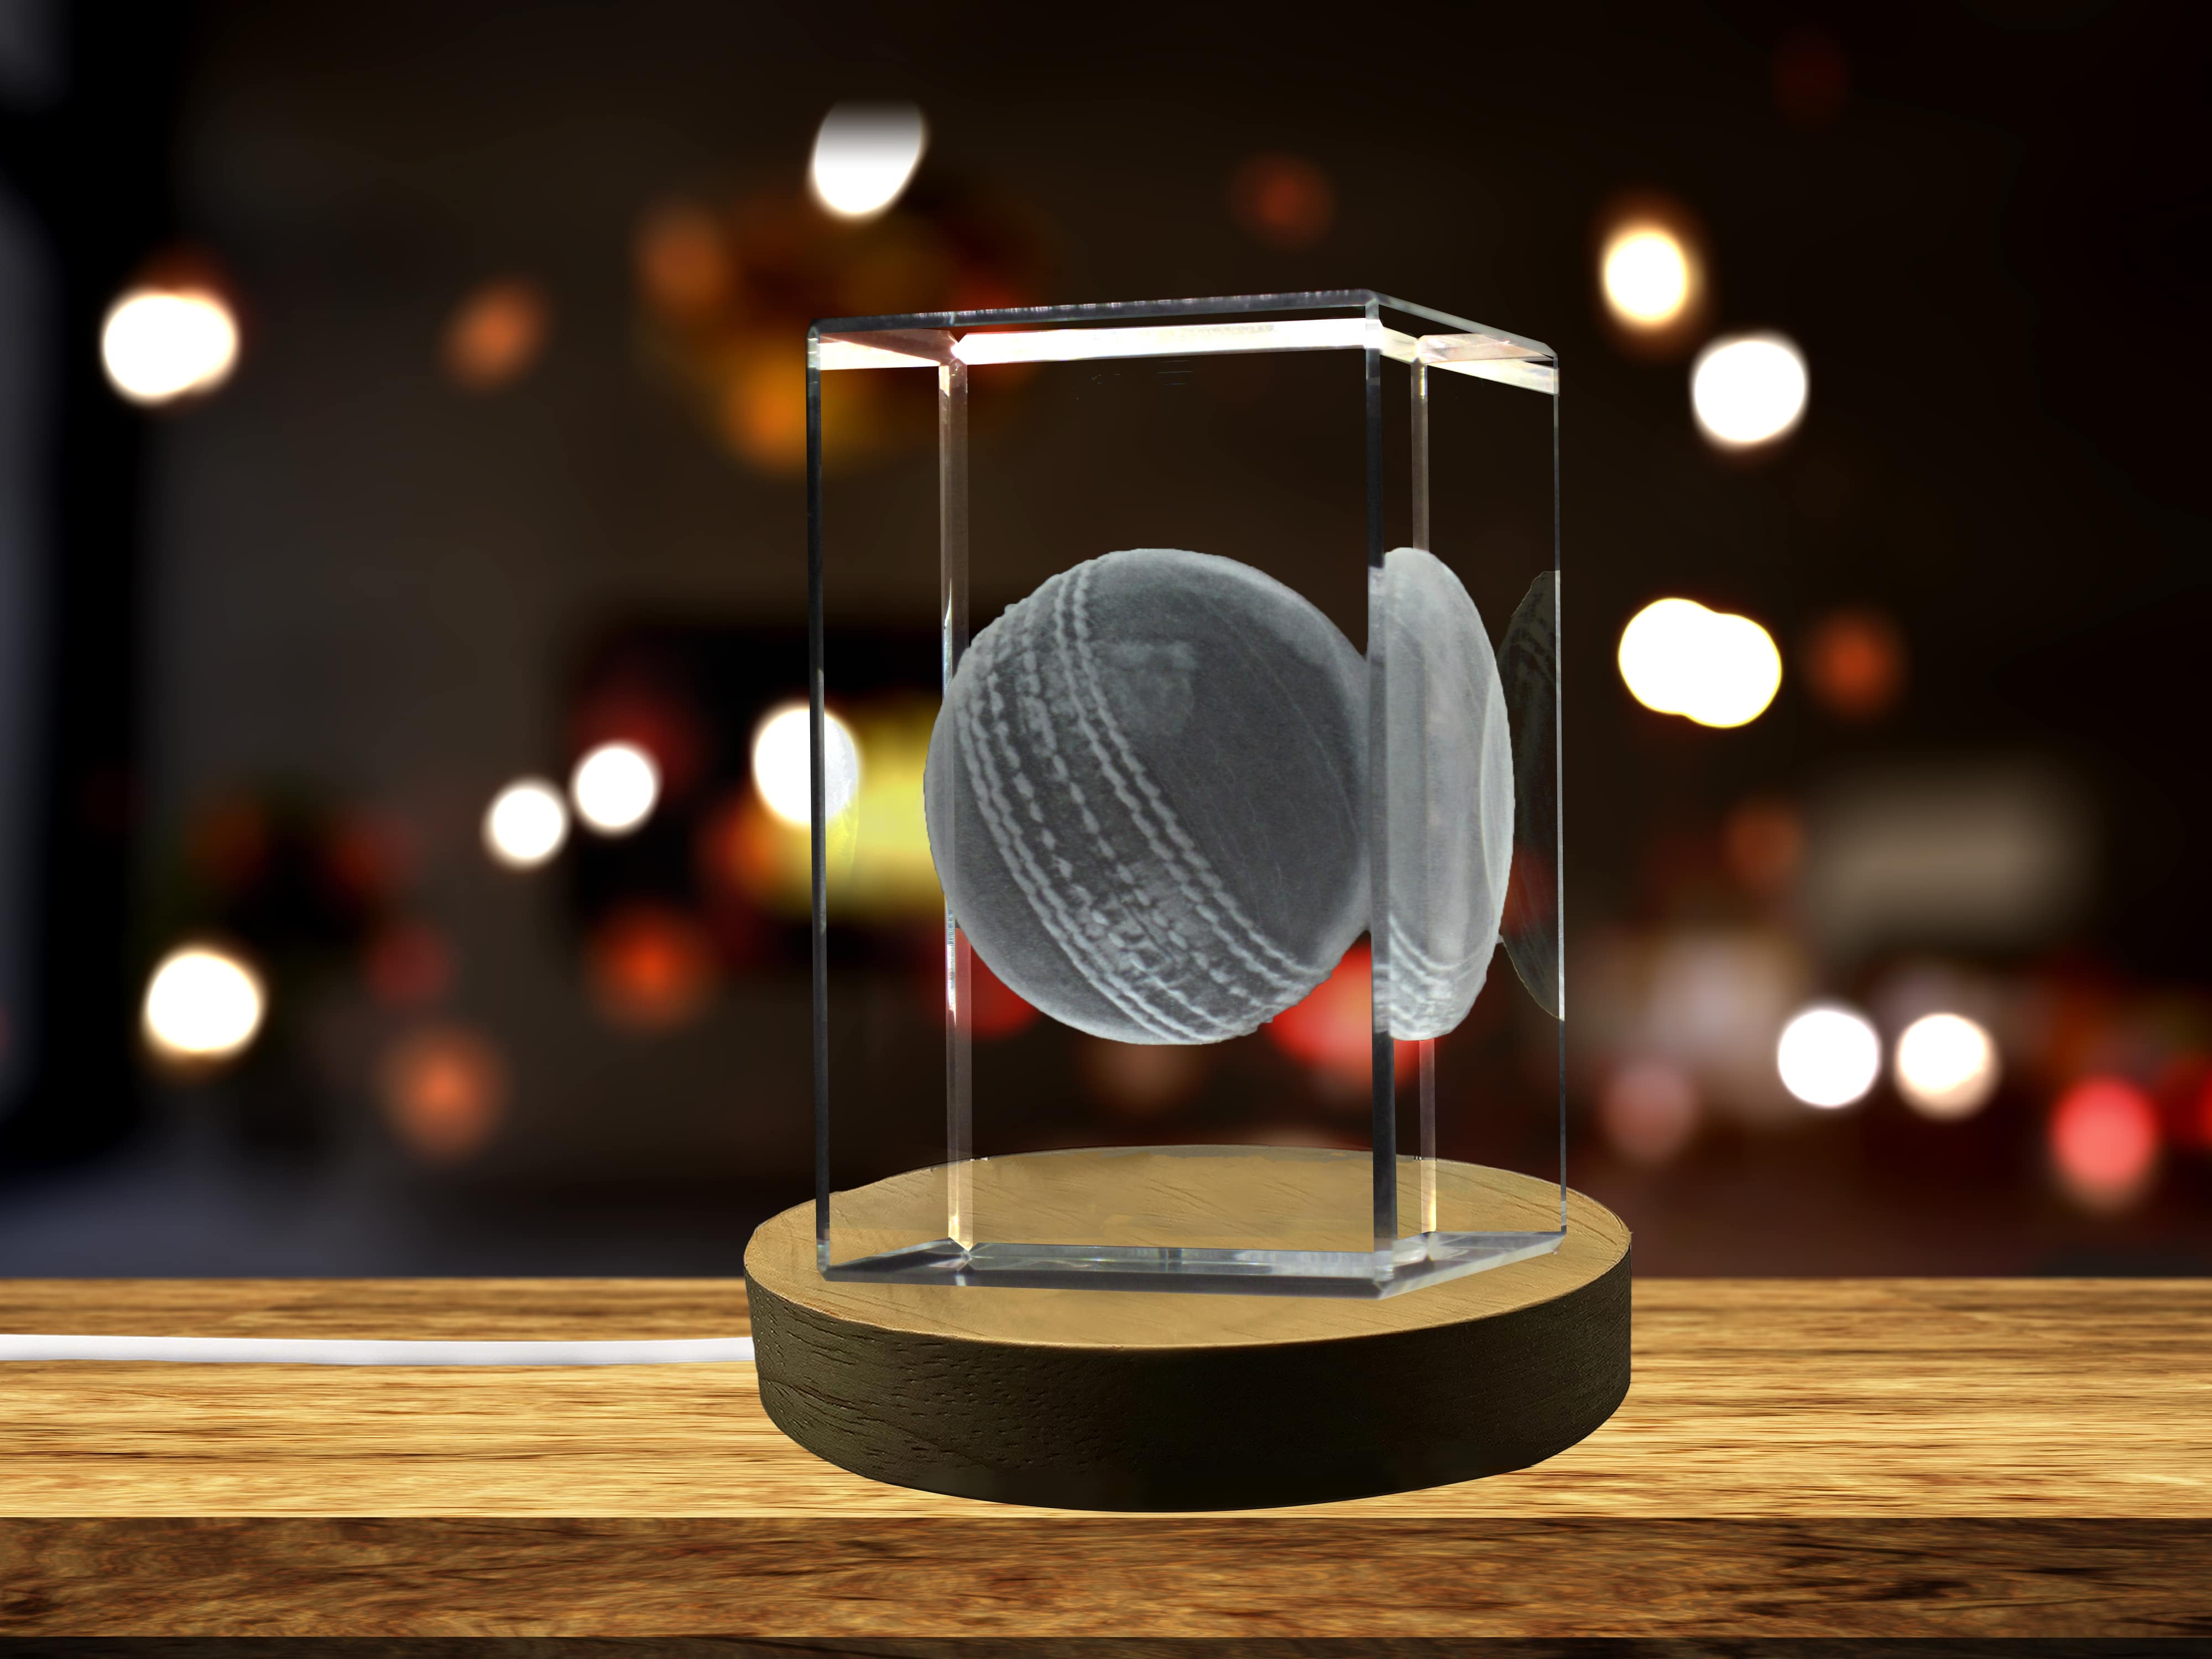 Cricket Ball 3D Engraved Crystal | 3D Engraved Crystal Sport A&B Crystal Collection